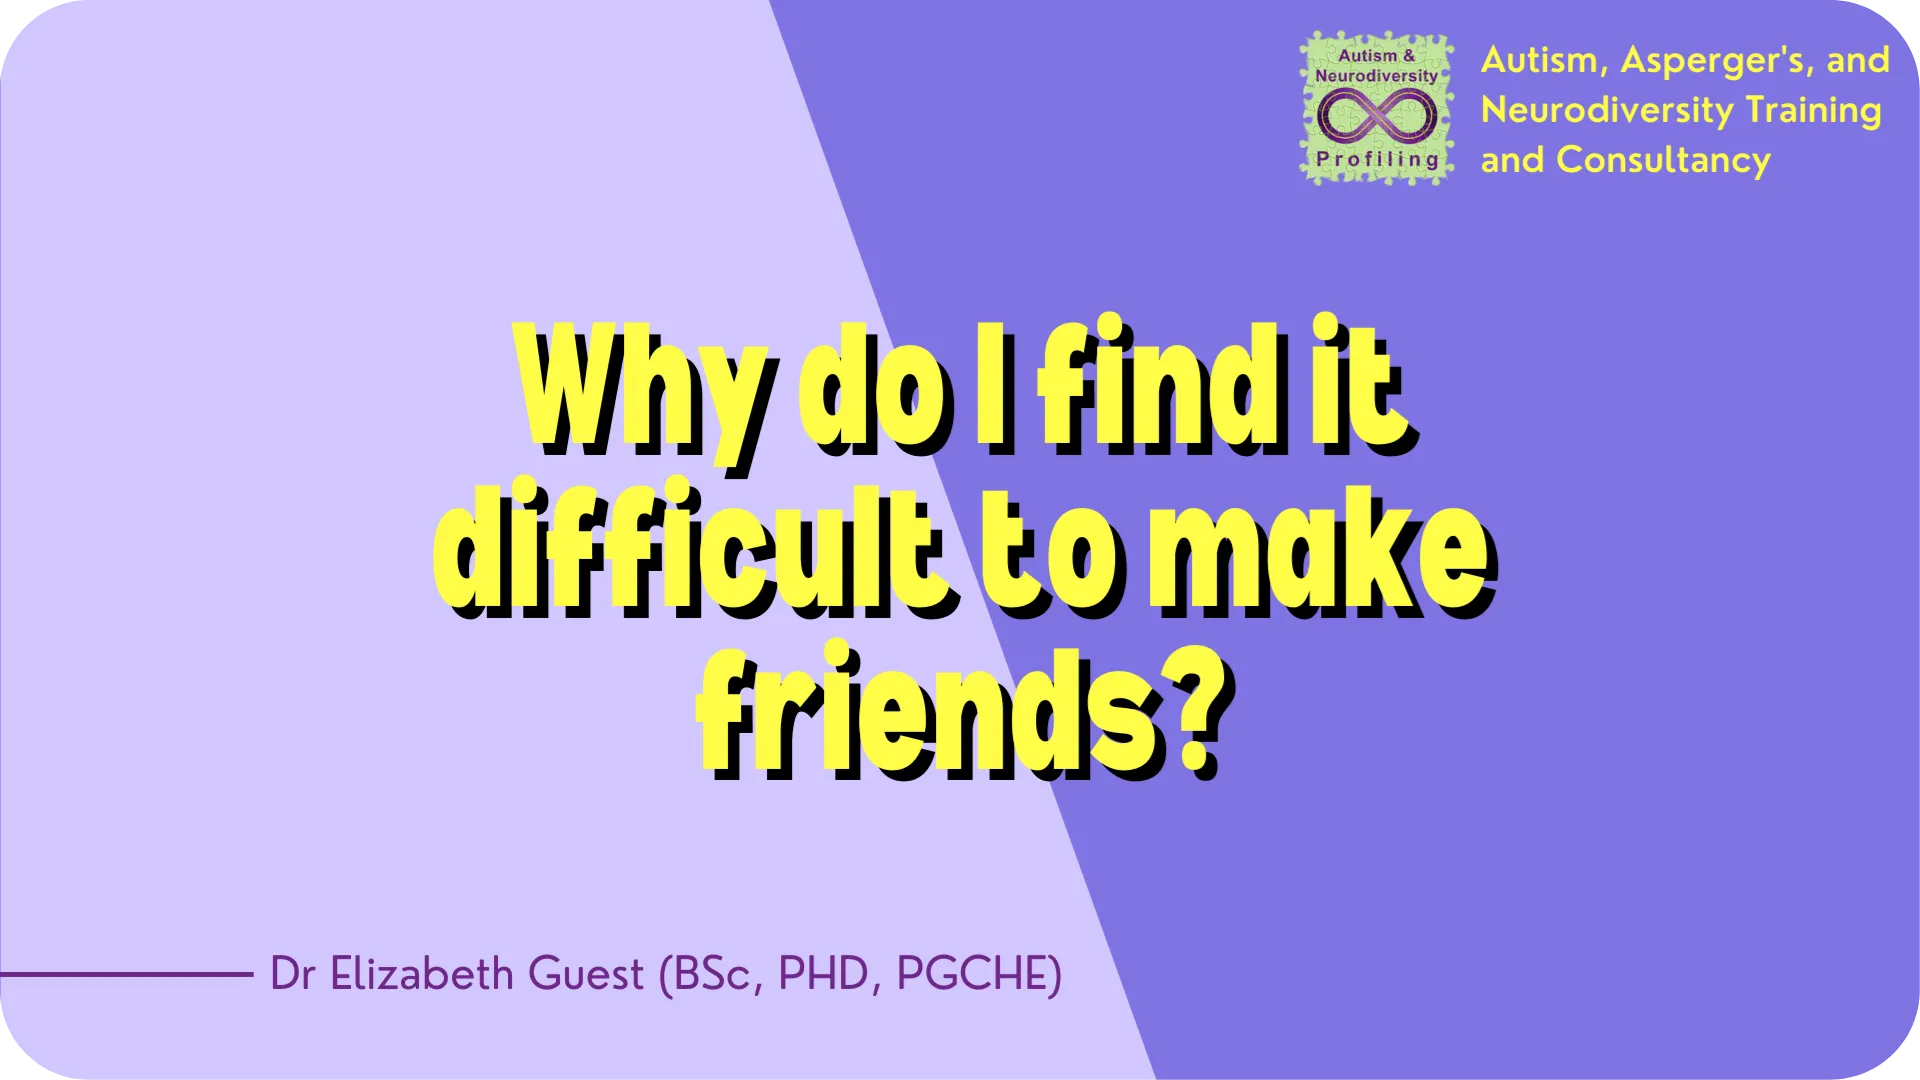 Aspiedent video thumbnail with the title of the video 'Why do I find it difficult to make friends?' on a purple background.